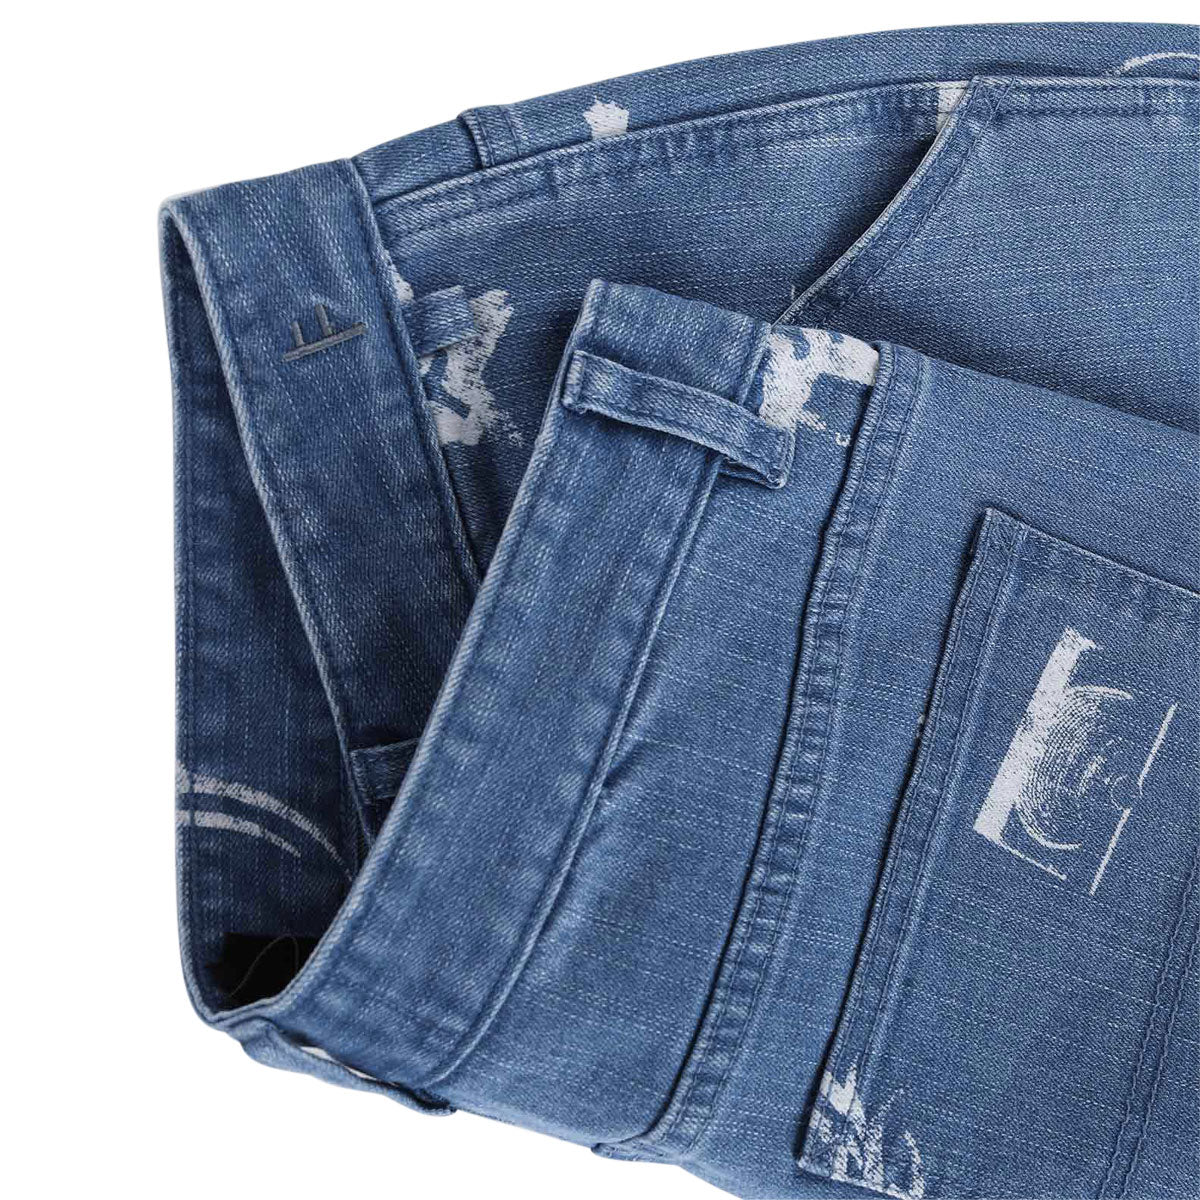 Former Distend Wishing Jeans - Worn Blue image 5